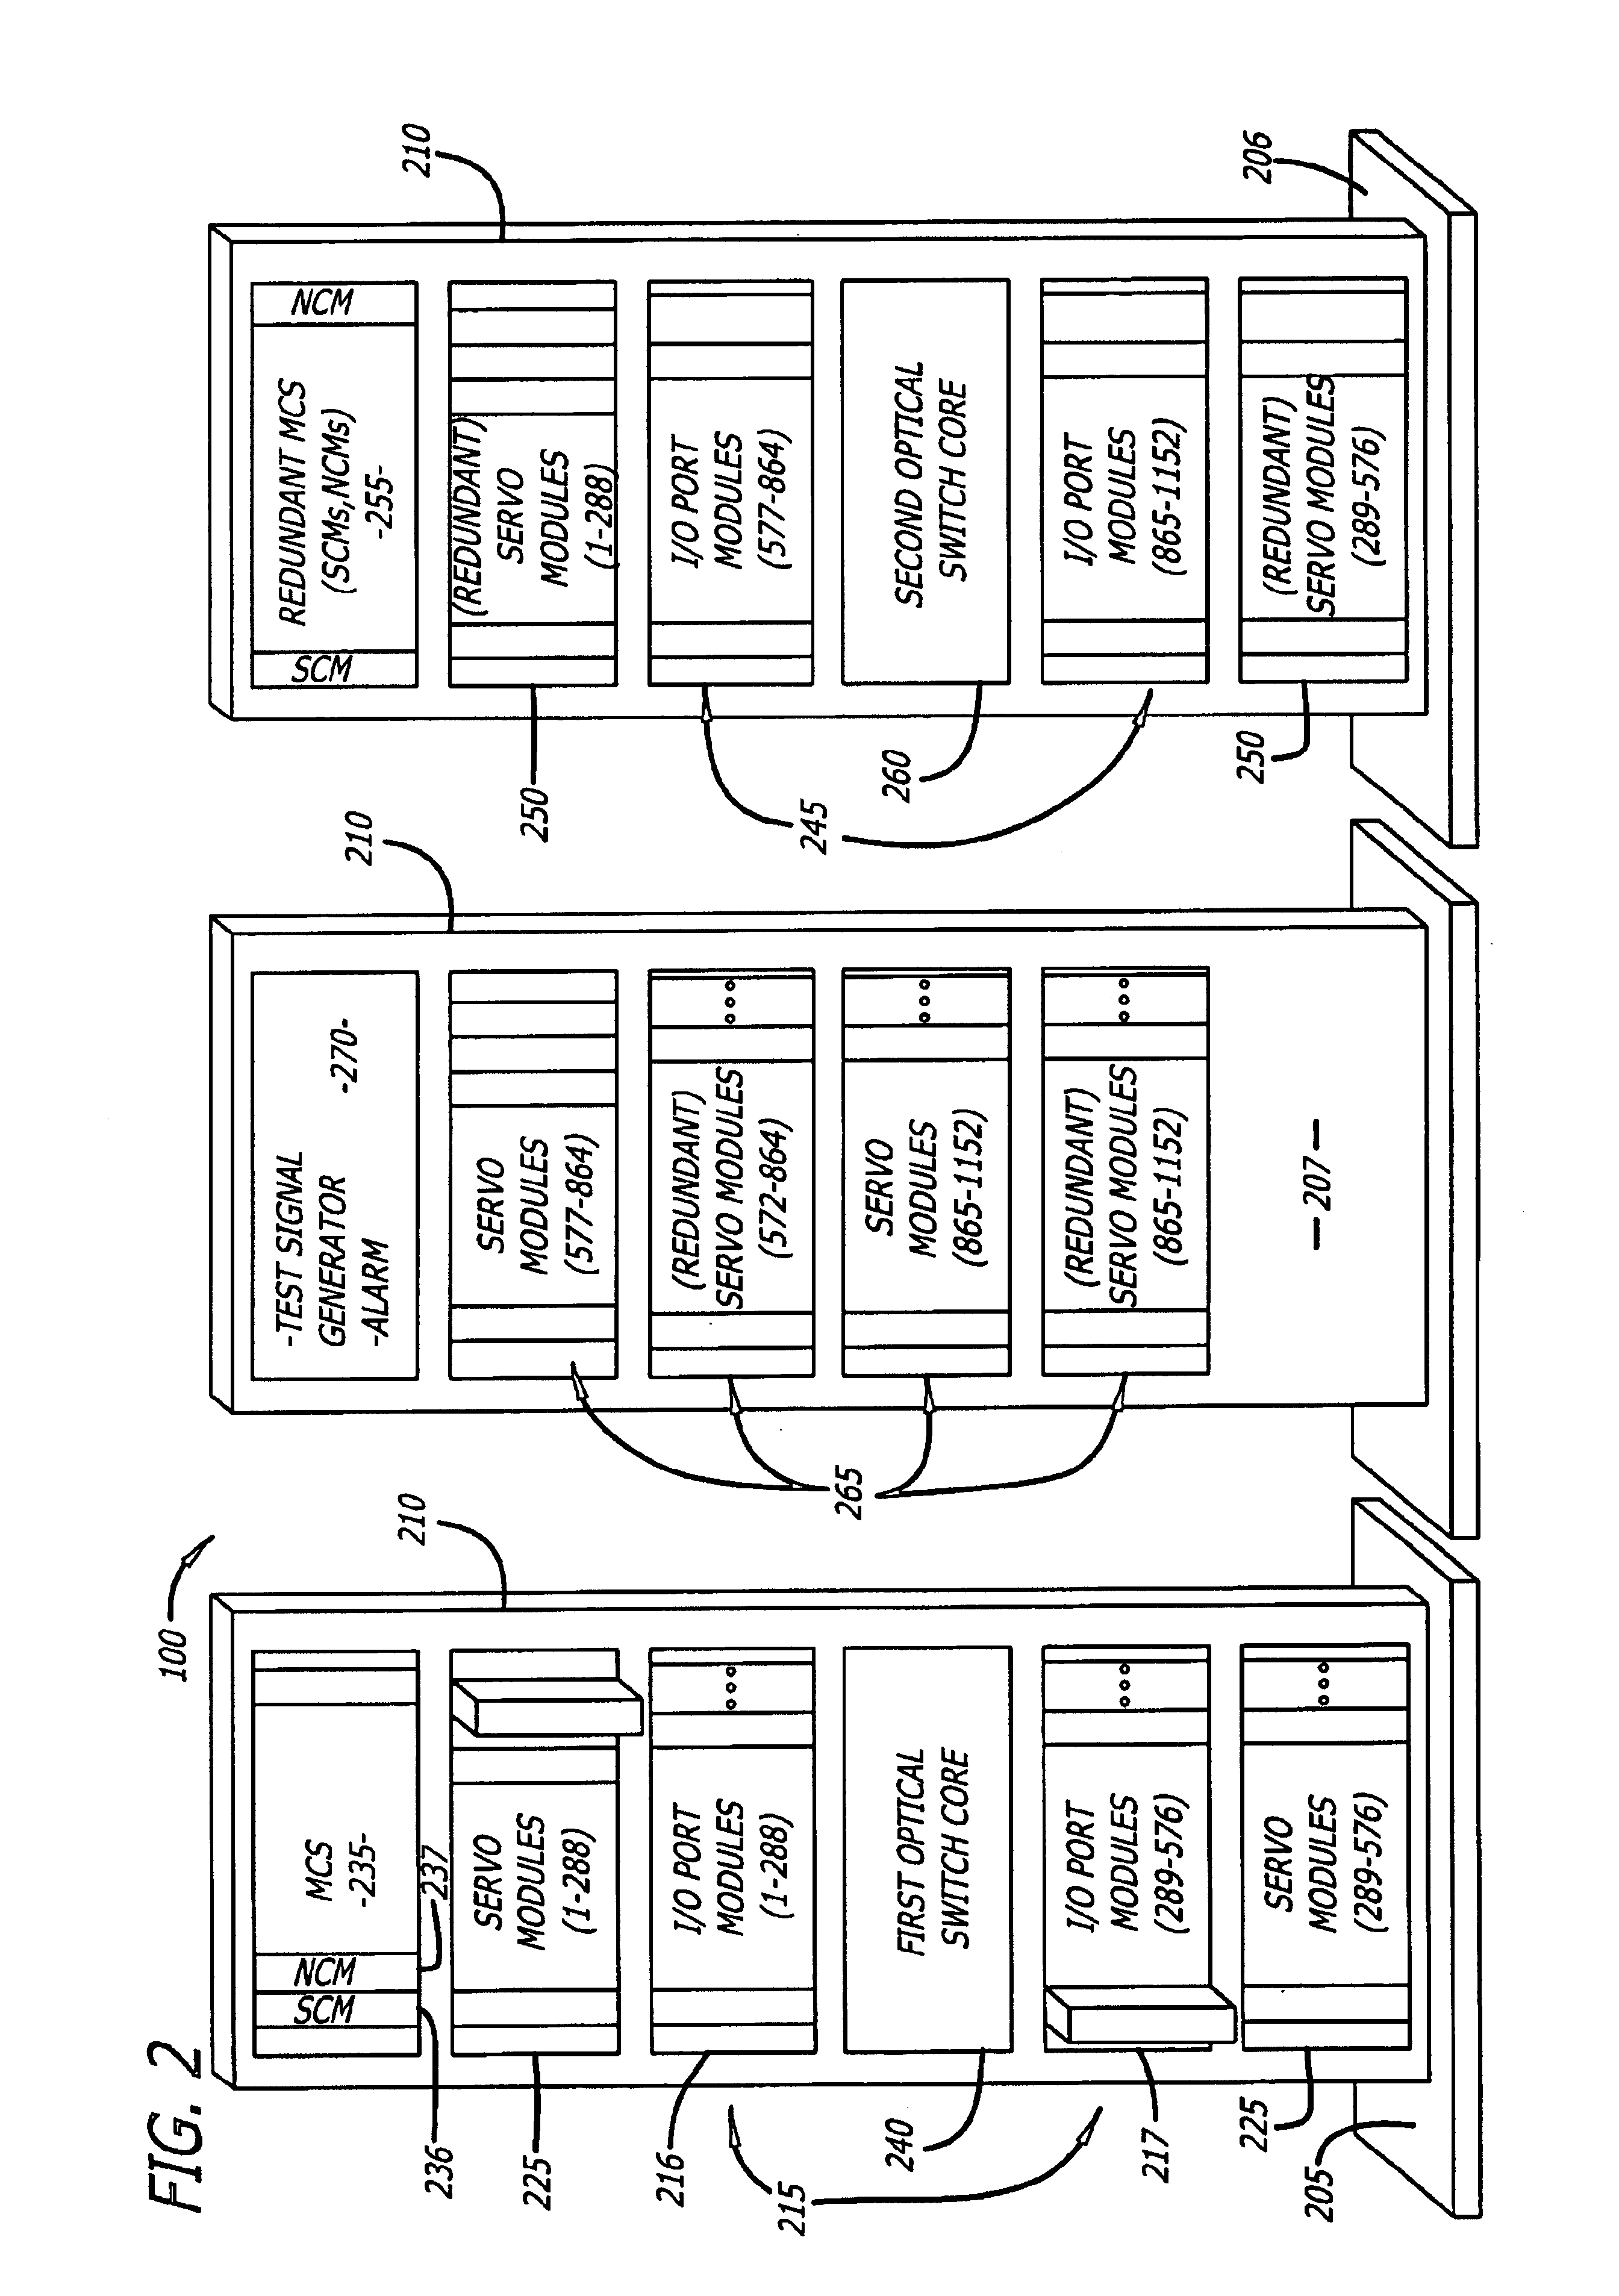 Signals and methods for increasing reliability in optical network equipment